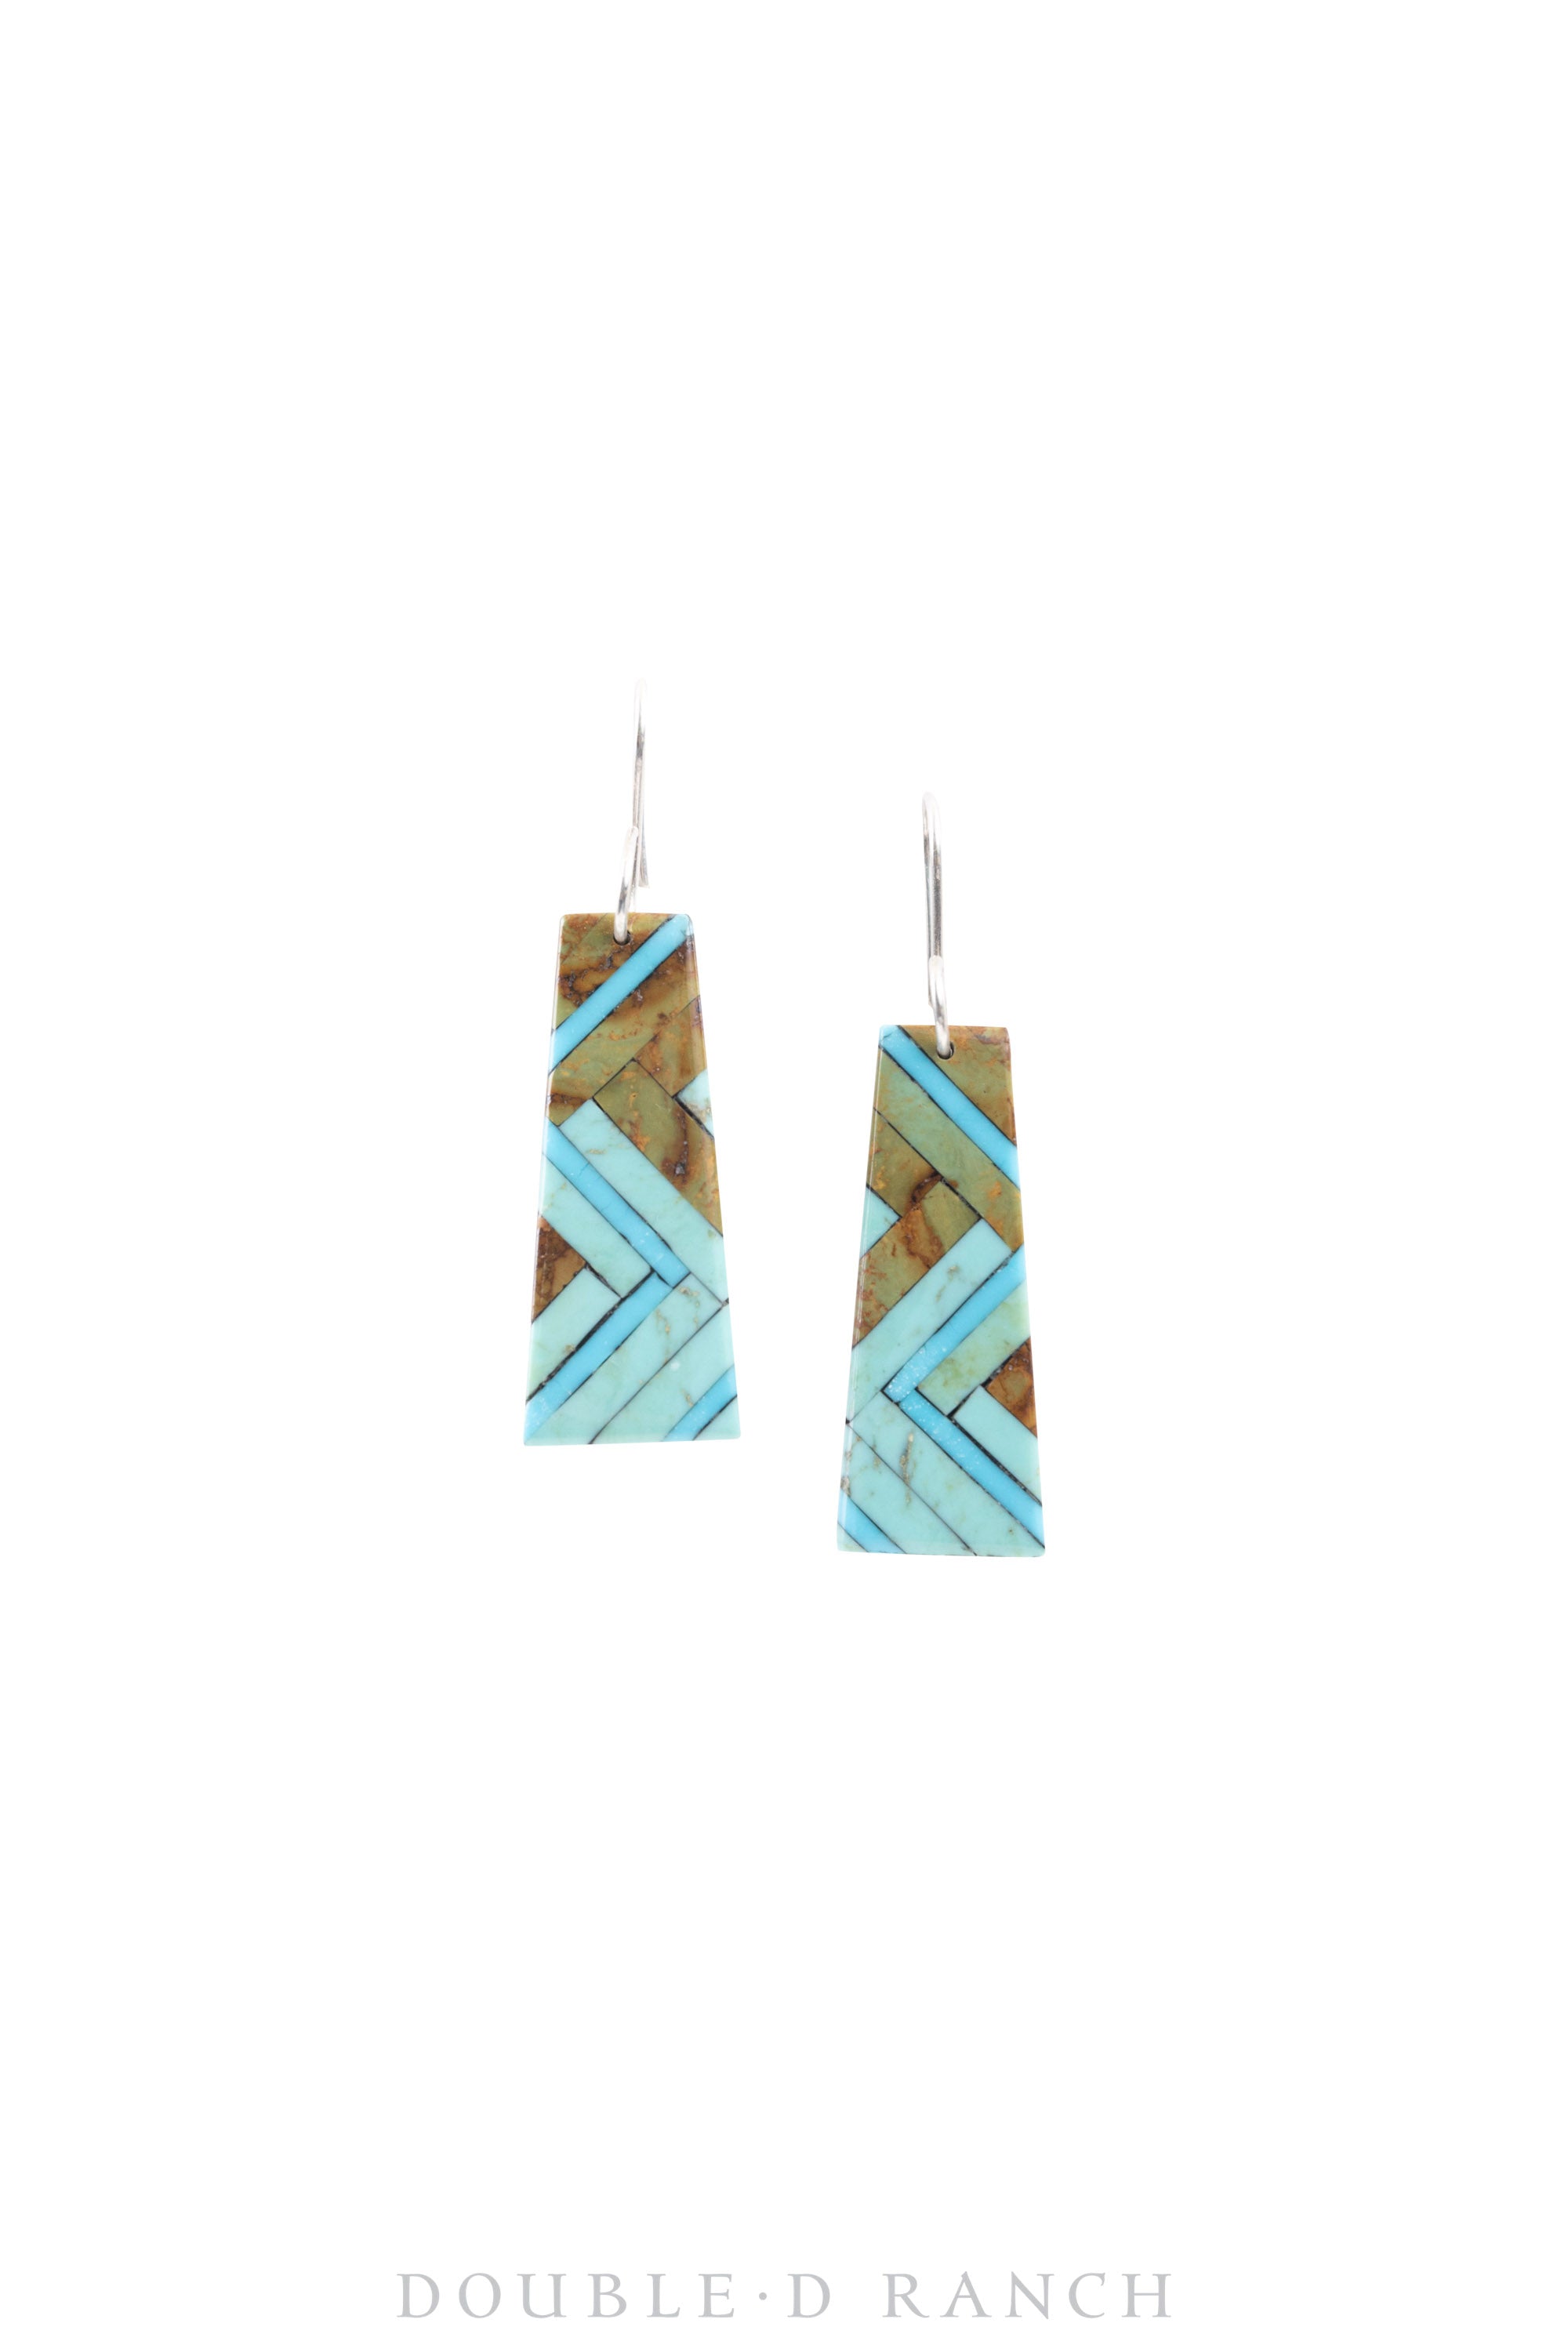 Earrings, Inlay, Turquoise Composite, Artisan, Contemporary, 1354